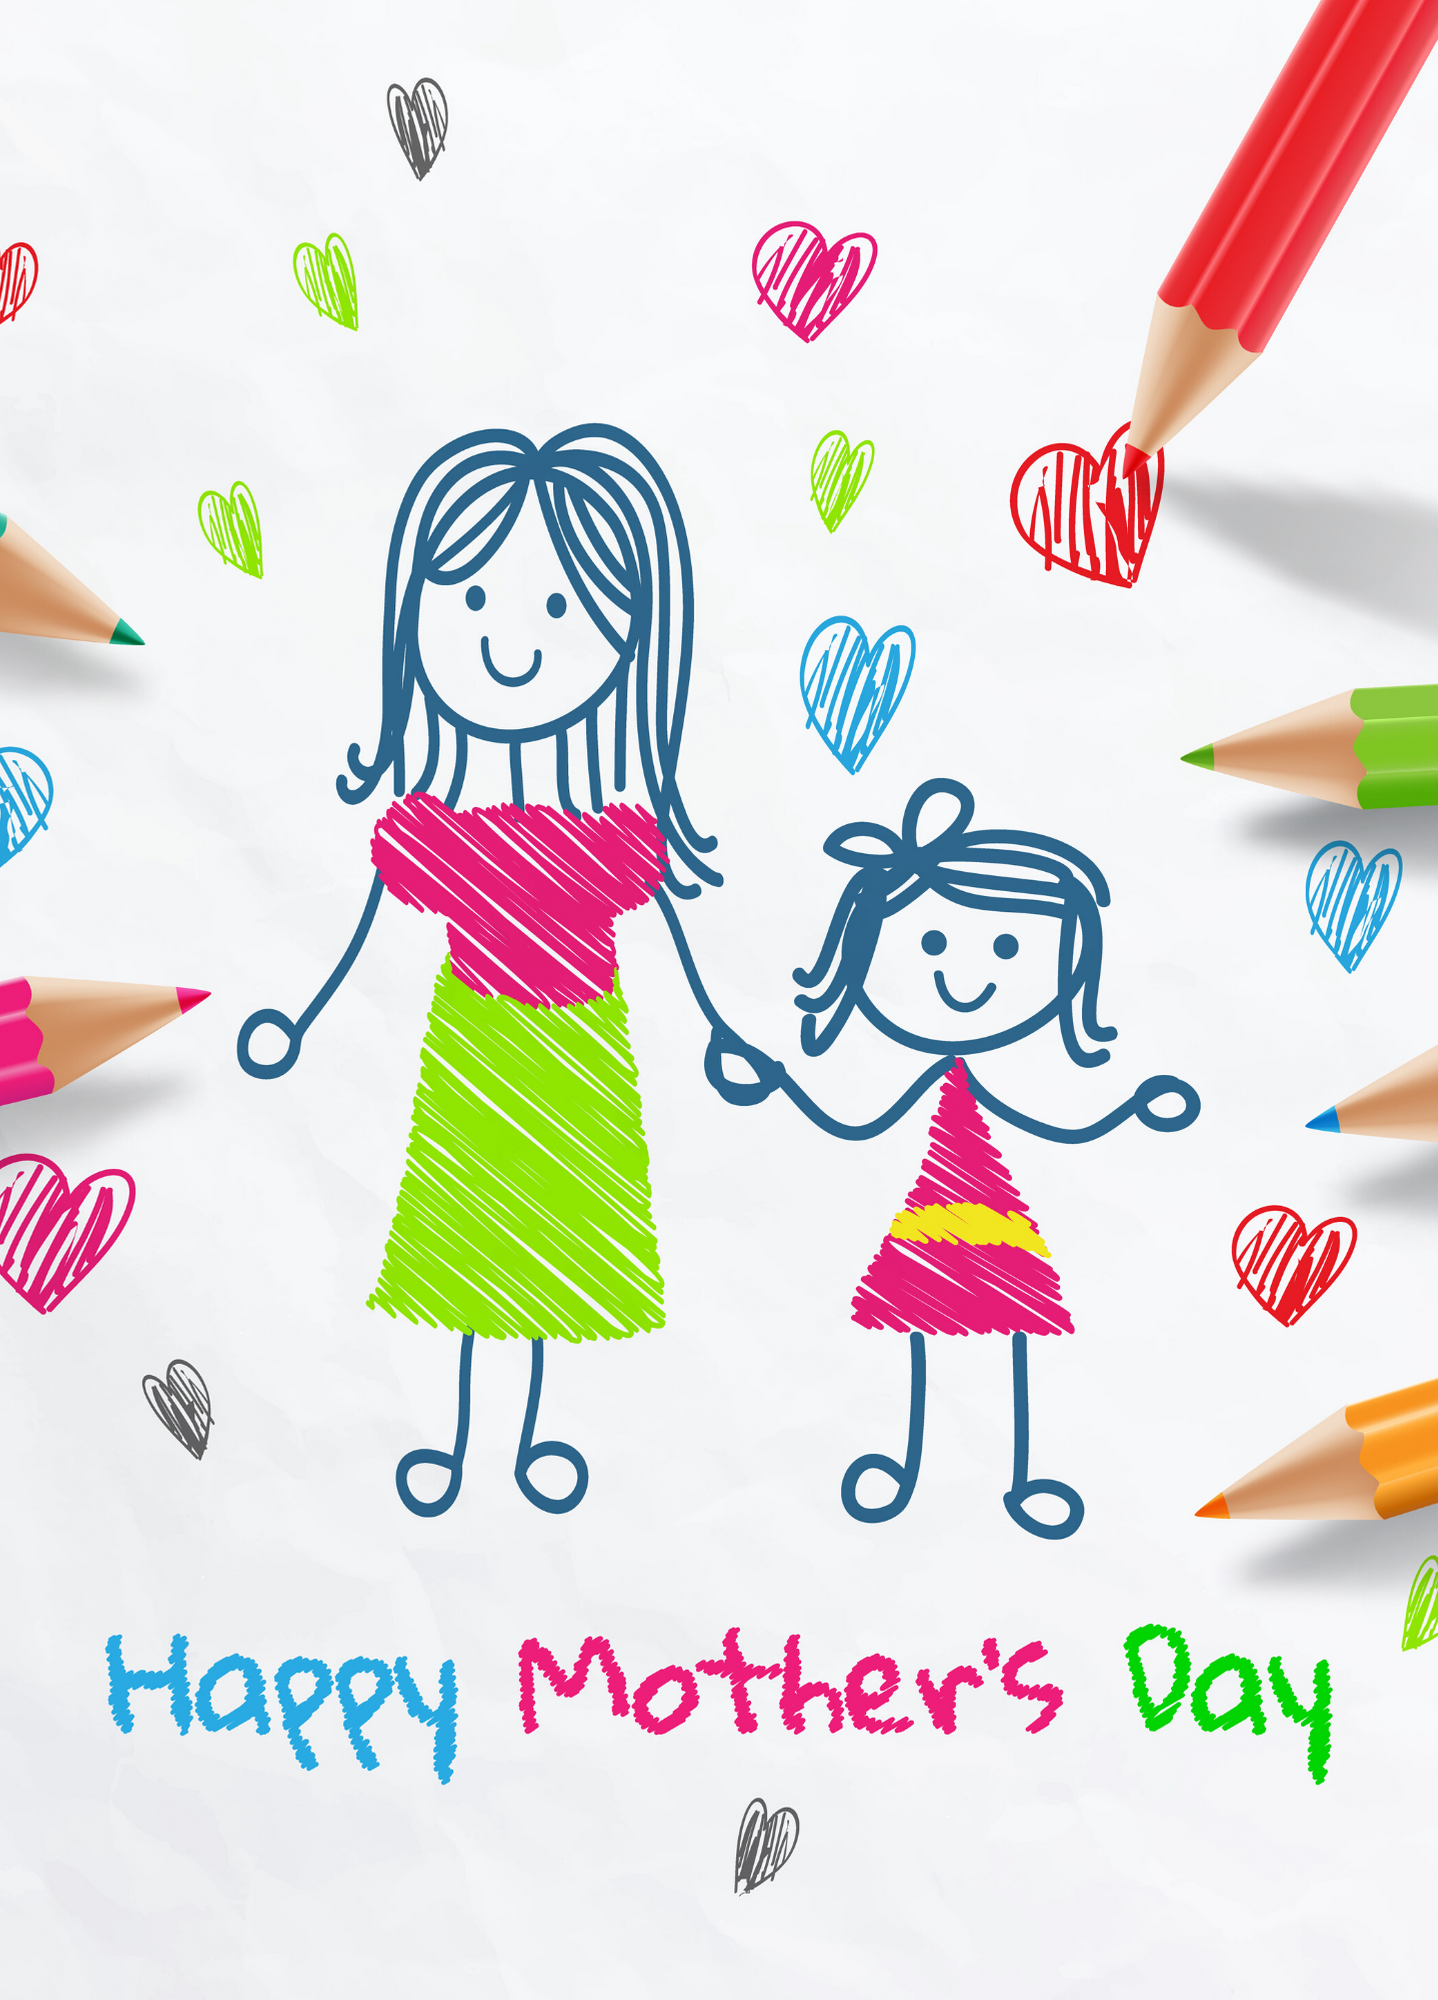 Happy Mother's day Greeting Poster with Women Sketch Design Vector  illustration